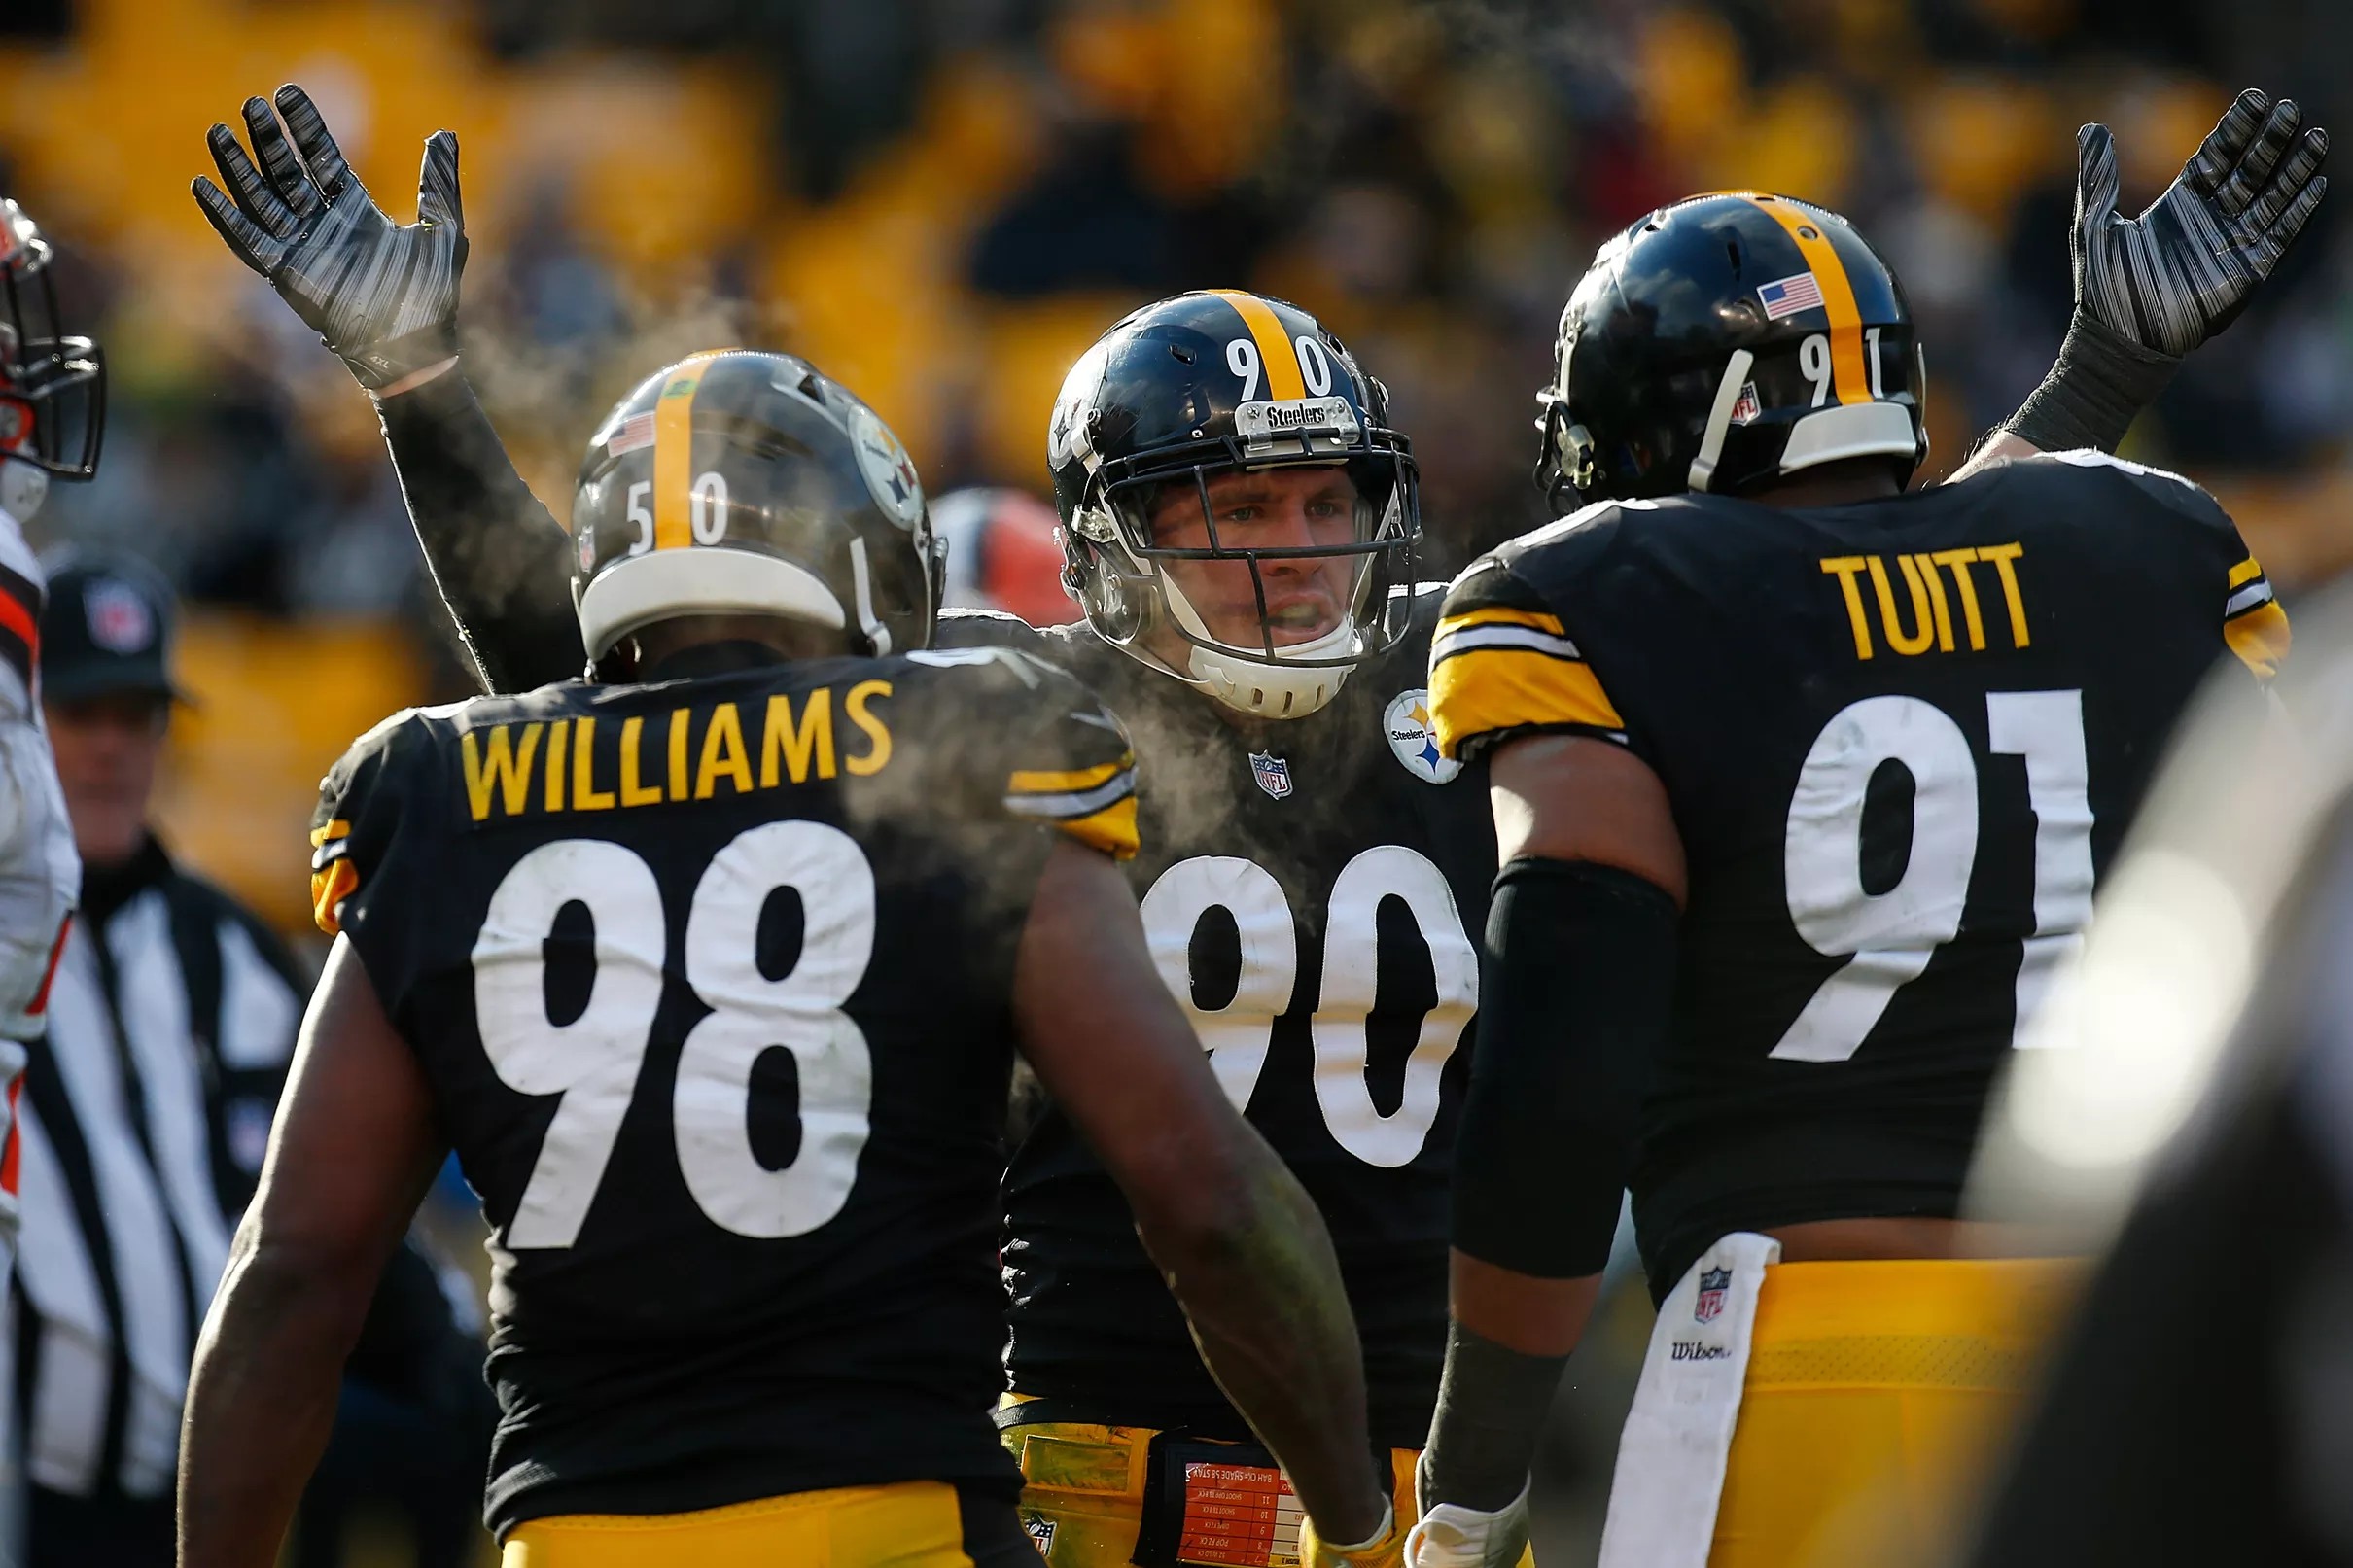 Steelers vs. Jaguars Preview Breaking down the Divisional game from